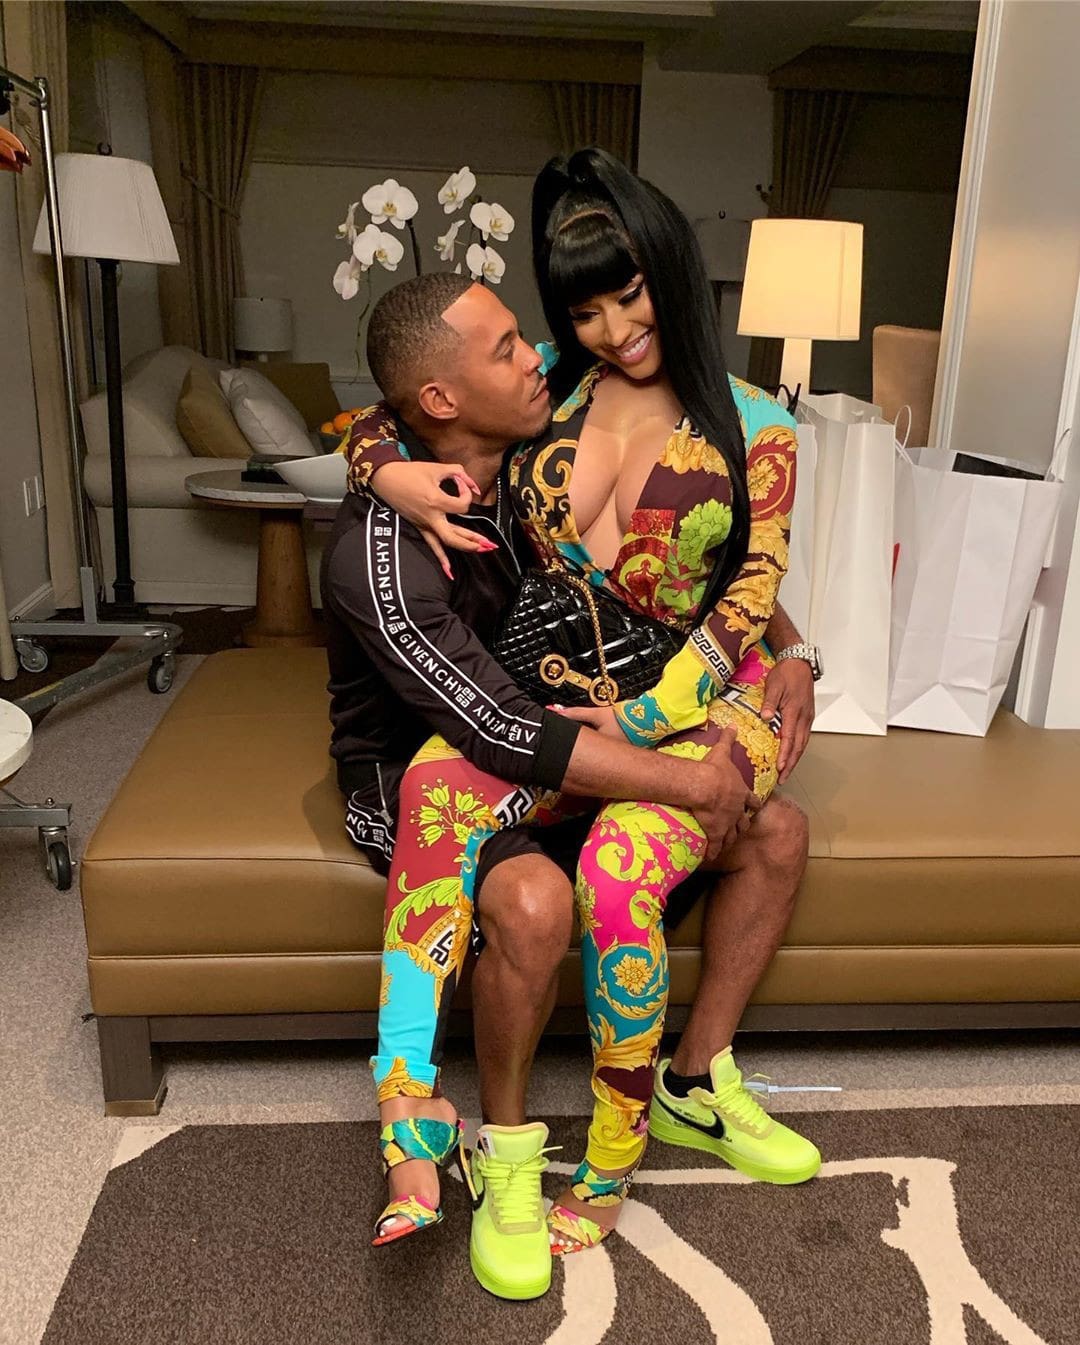 Nicki Minaj Films A Clip With Her BF Kenneth Petty And Fans Are Making Fun Of Him: 'Safaree Would Never Look This Awkward'